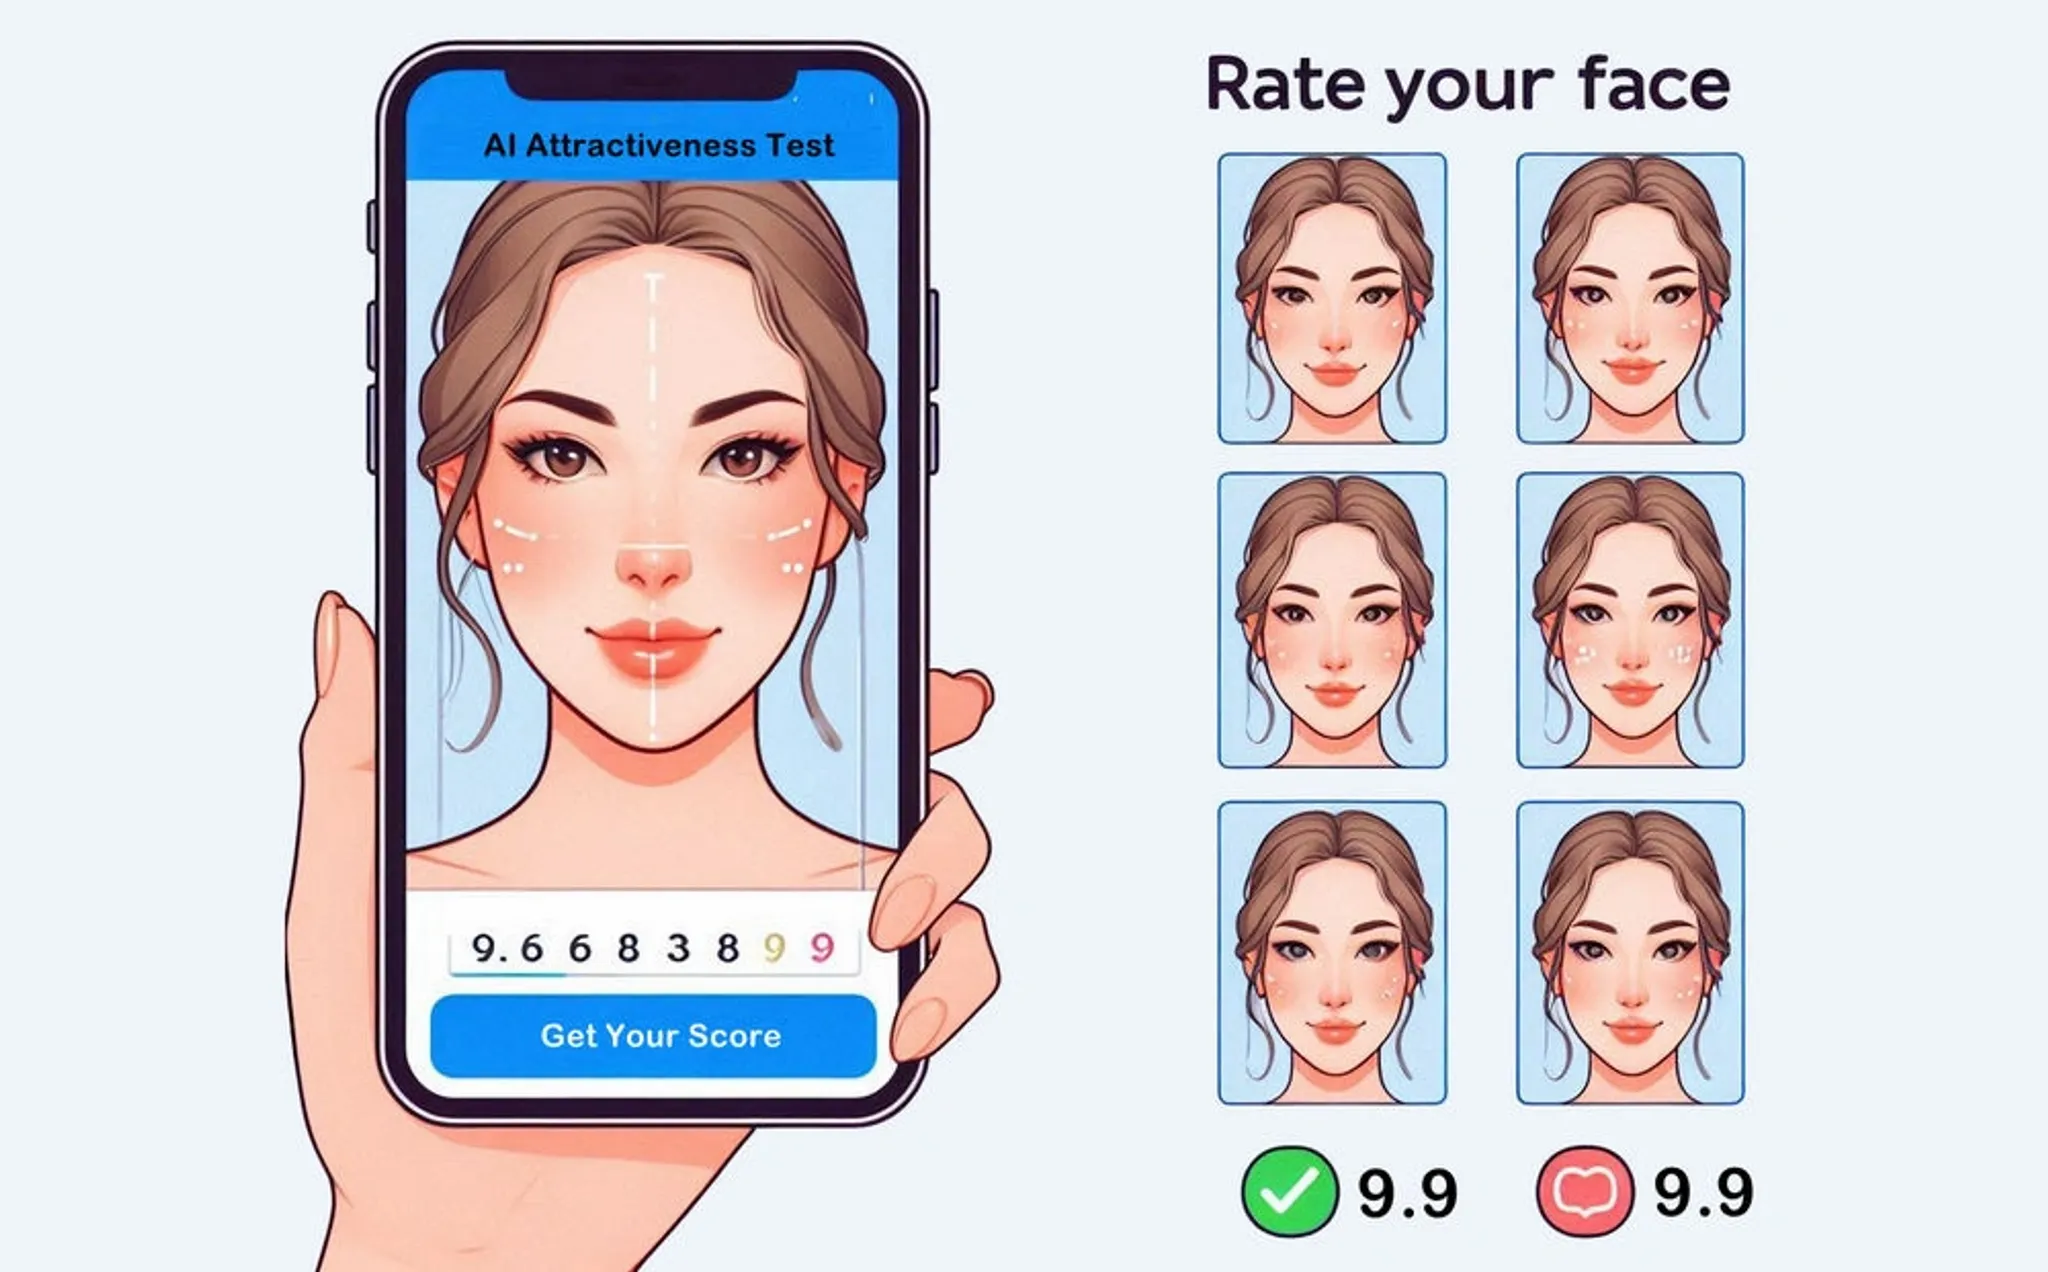 AI Attractiveness Test: How to Do It and How Accurate Is the Test